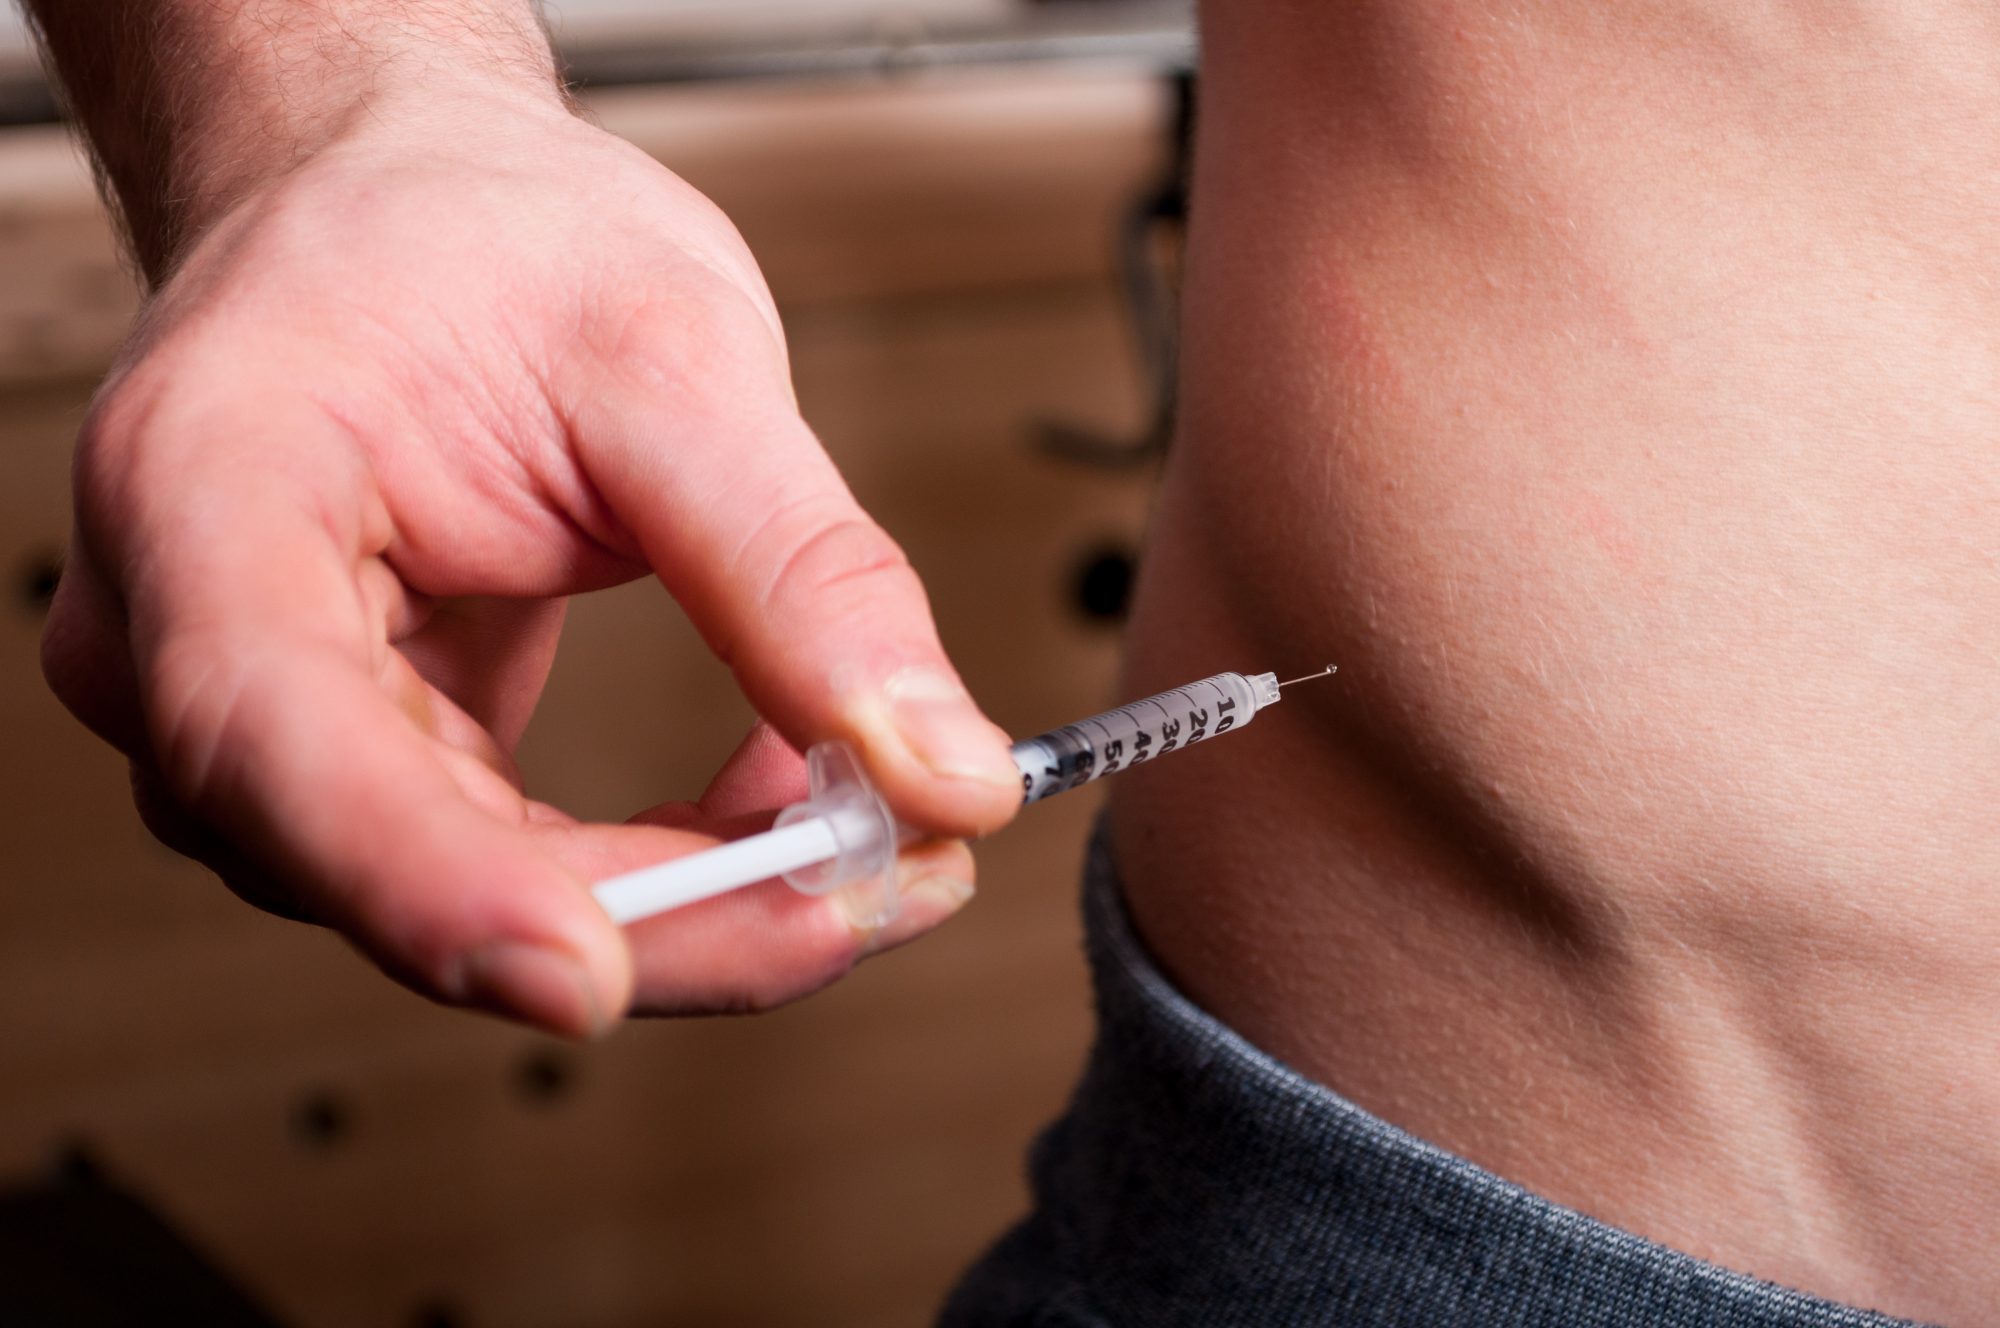 The risks of anabolic steroids